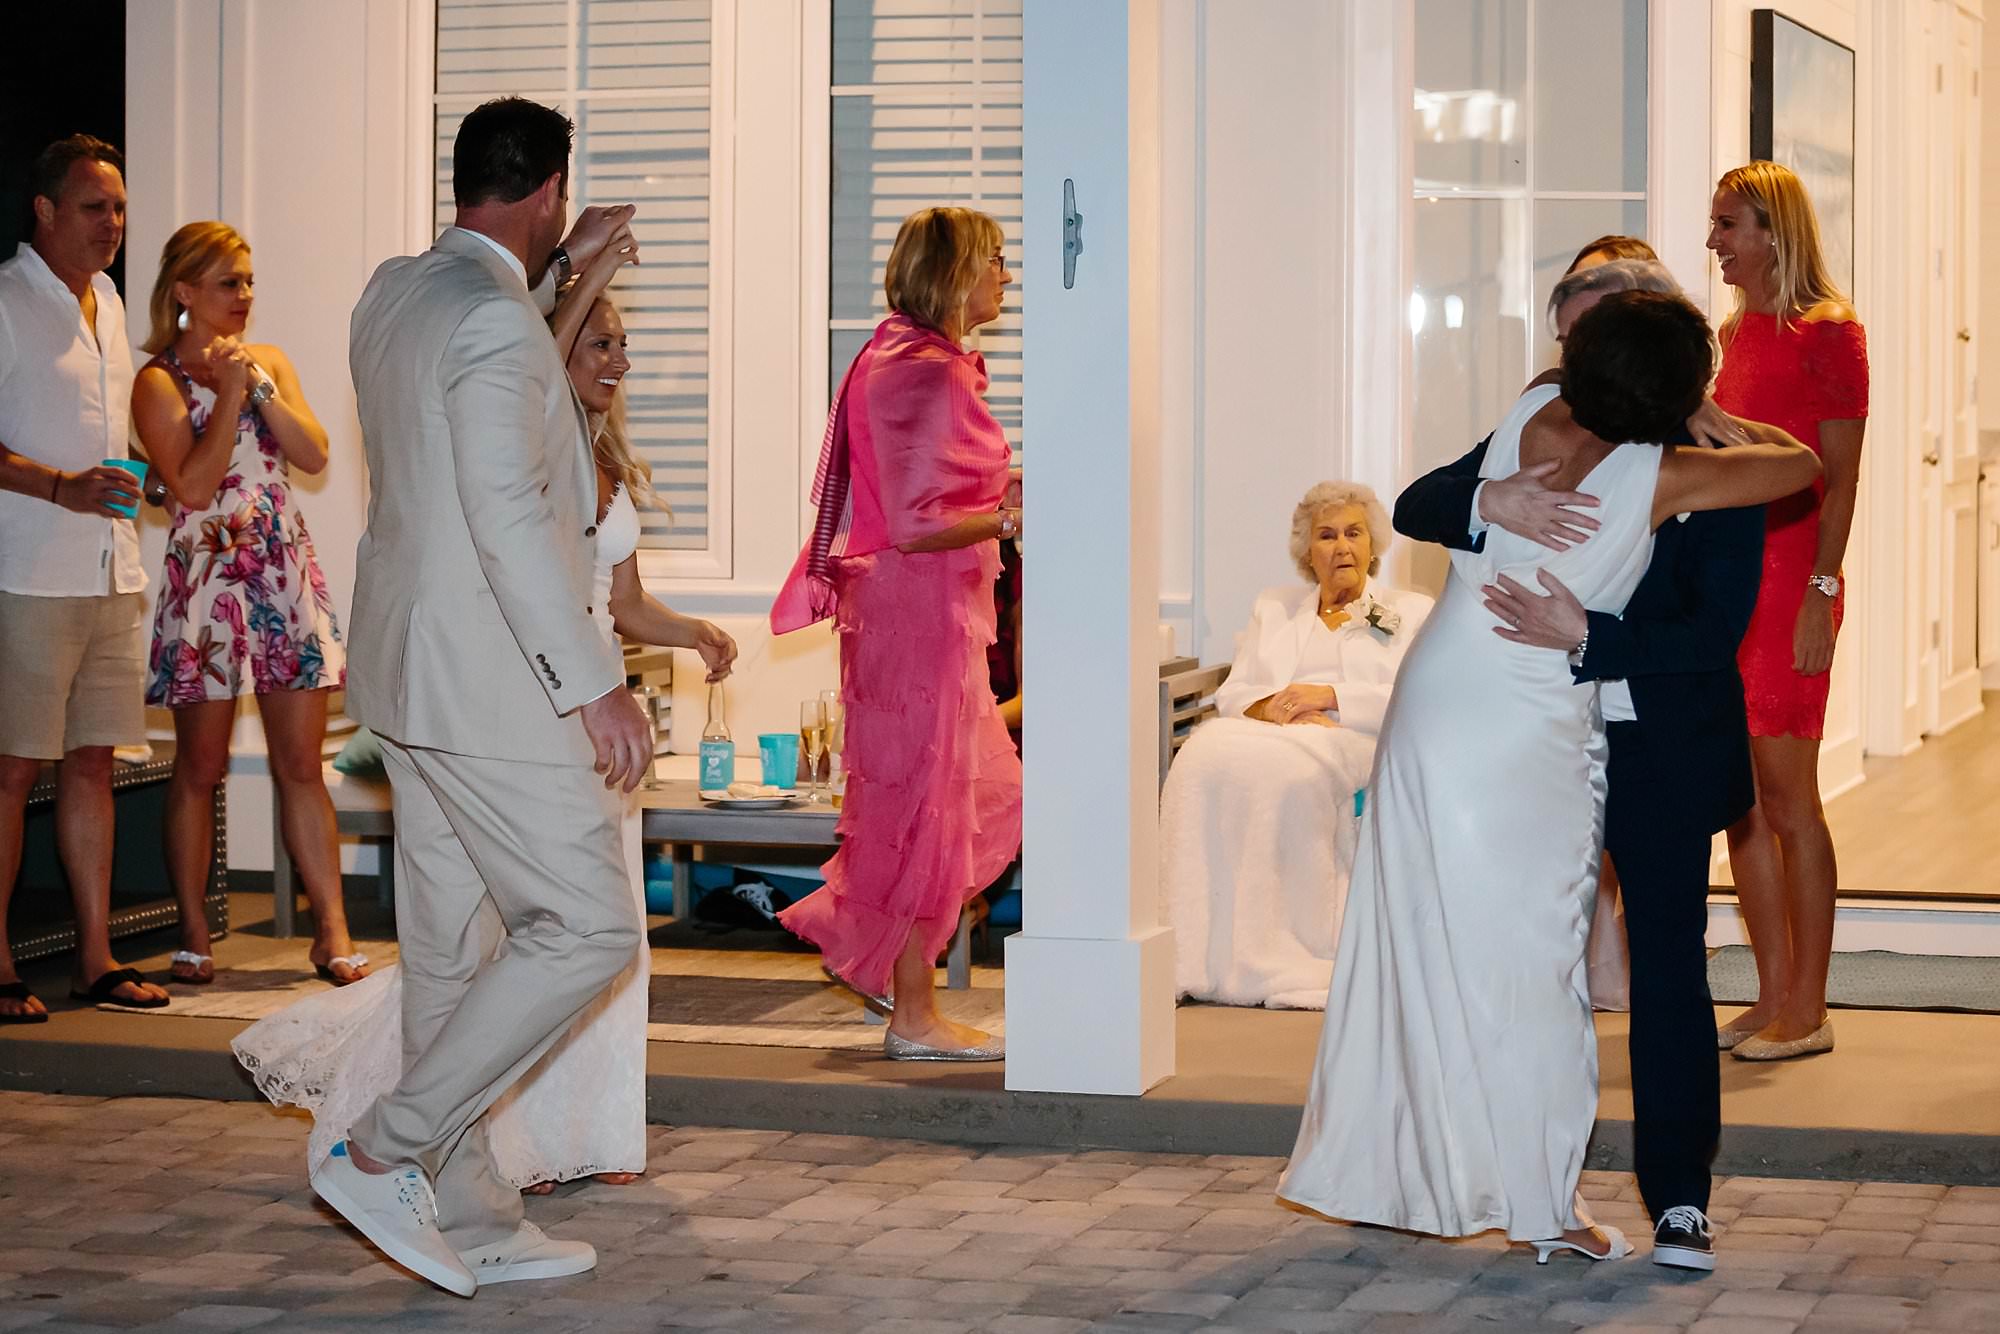 Groom spins brides durning first dance while brides parents join dancefloor